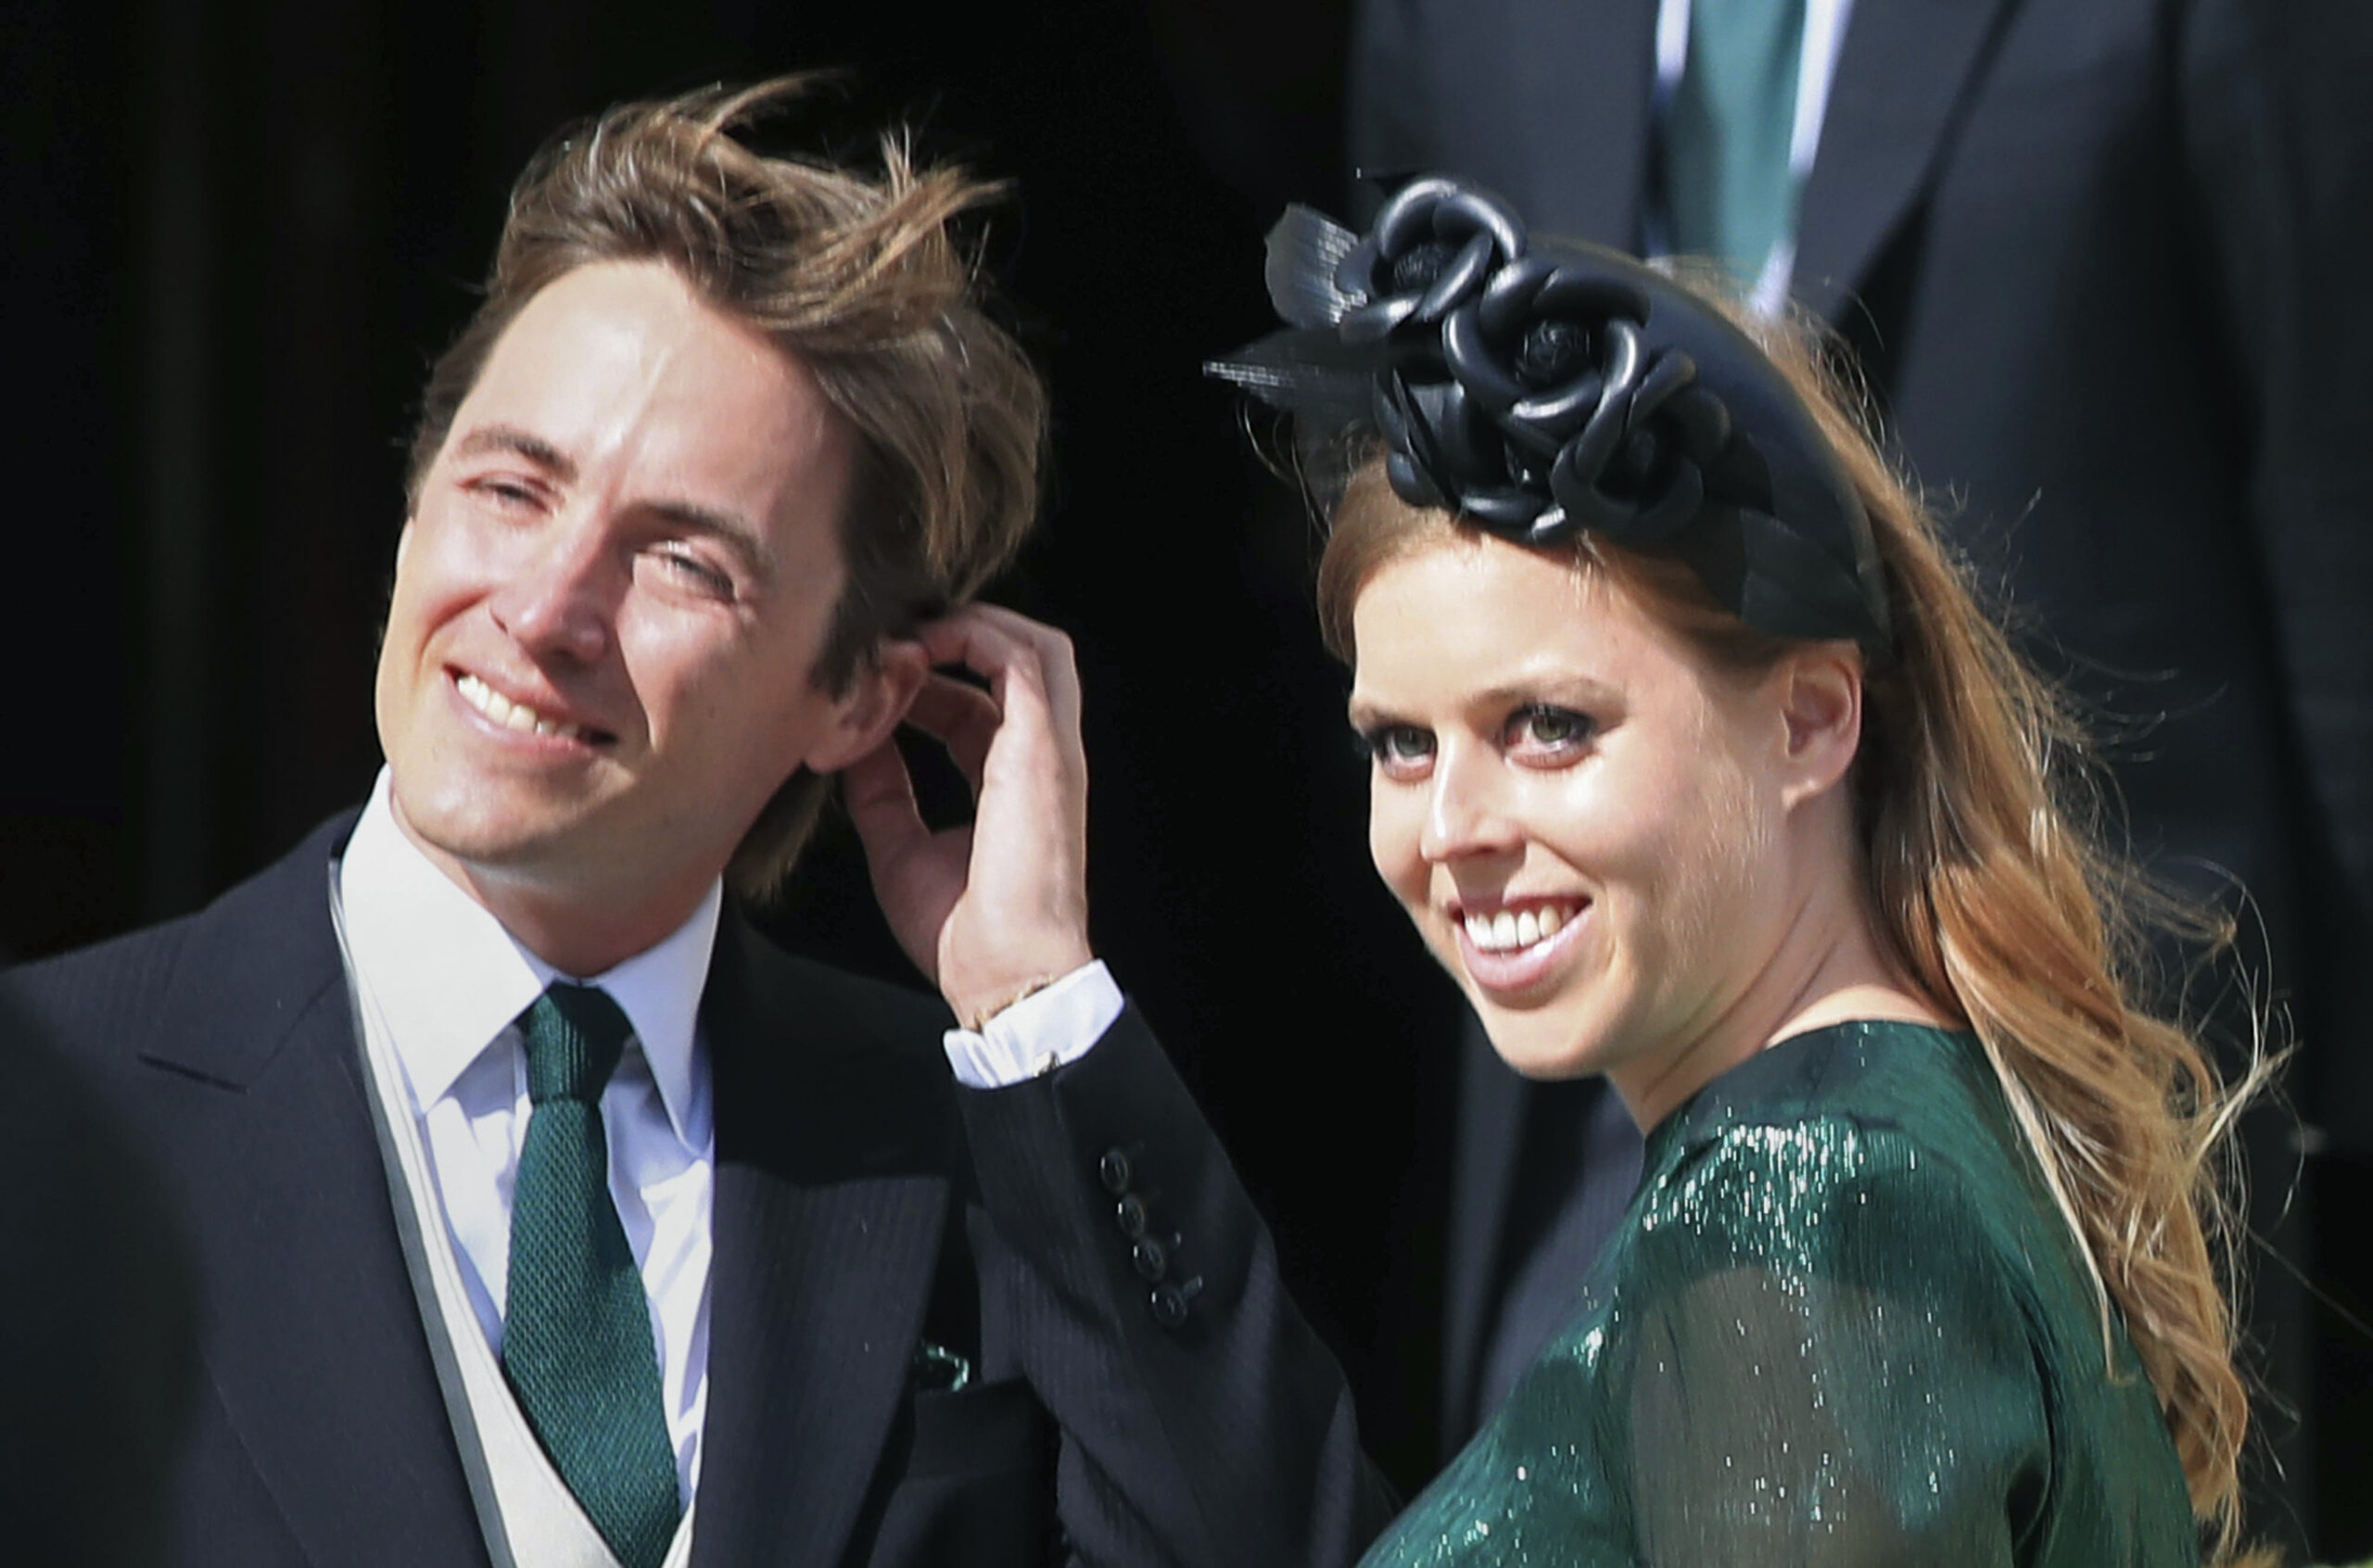 FILE - In this Aug. 31, 2019 file photo, Princess Beatrice and her then fiance Edoardo Mapelli Mozzi attend the wedding of Ellie Goulding and Caspar Jopling, in York, England. Buckinghan Palace said Wednesday, May 19, 2021 that the 32-year-old granddaughter of Queen Elizabeth II and husband Edoardo Mapelli Mozzi are due to have their first child in the autumn. It said “both families are delighted with the news.” Beatrice, who is the elder daughter of Prince Andrew and the former Sarah Ferguson, married property developer Mapello Mozzi in July 2020, at a small ceremony constrained by coronavirus restrictions. (Peter Byrne/PA via AP, File)